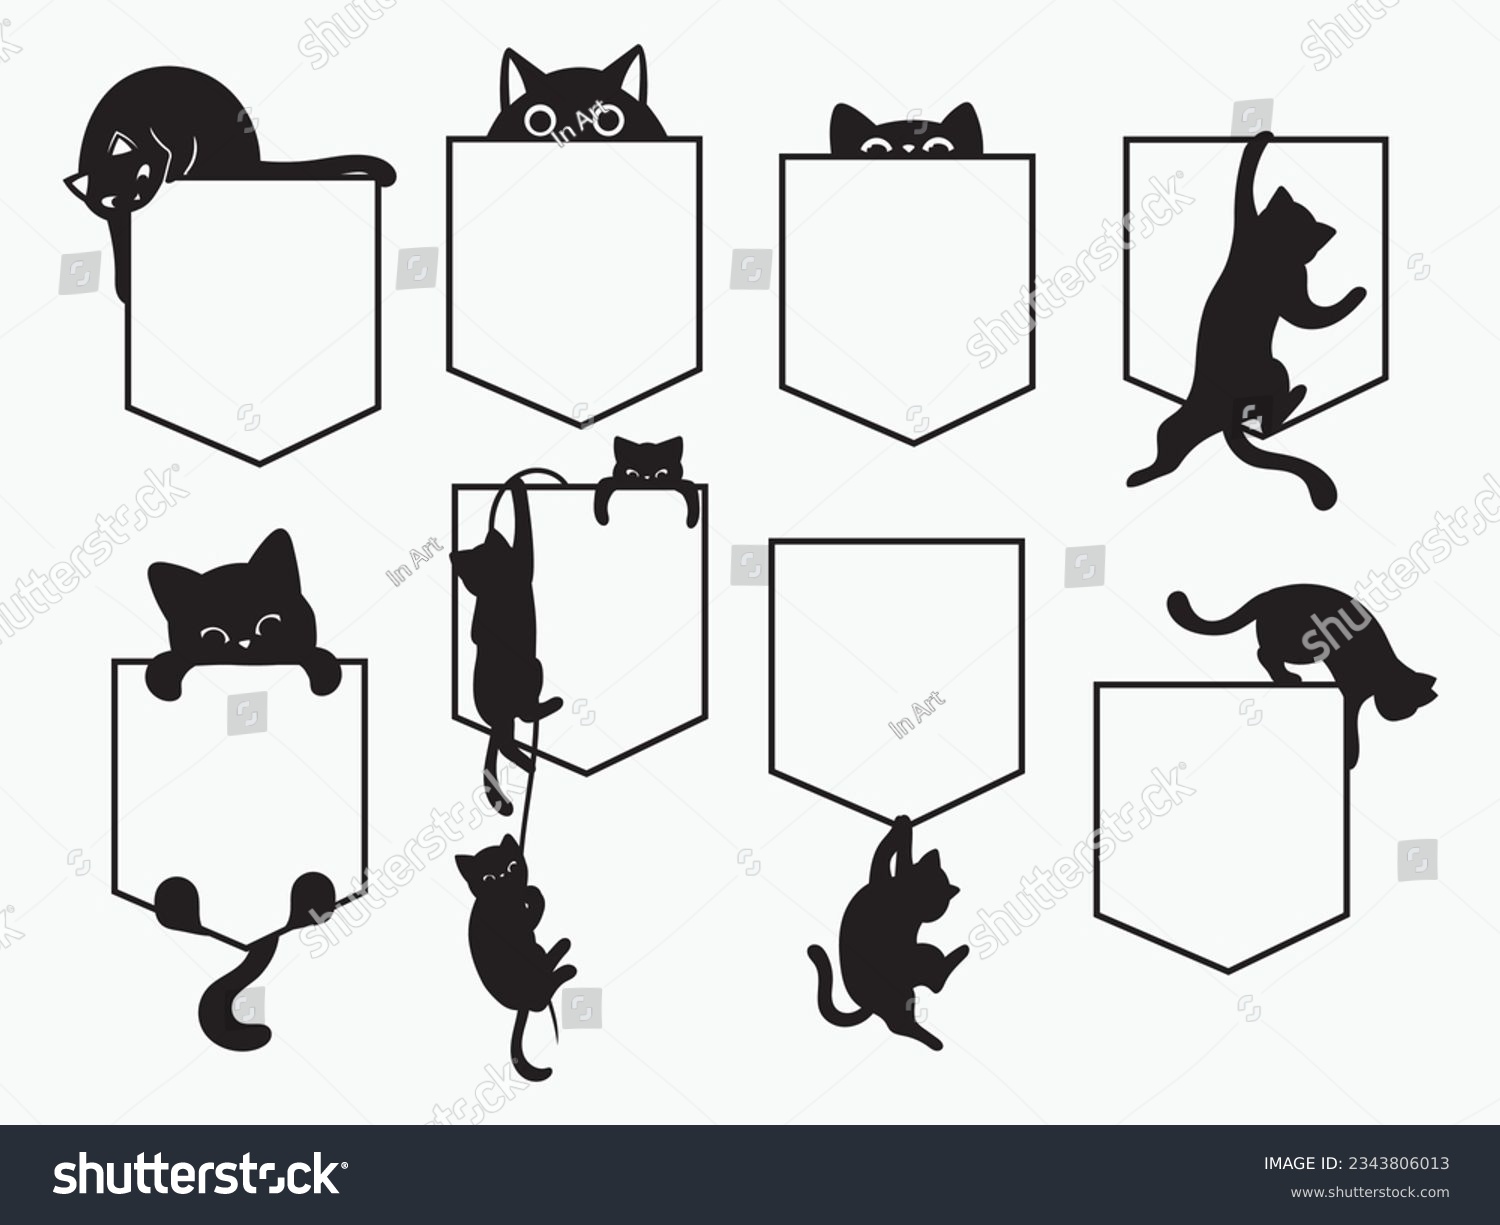 SVG of Set of silhouette pocket cat. Collection of playful cats peeking out of a pocket. Design for t-shirt. Kawaii kitties. Funny animals. Vector illustration on white background. svg